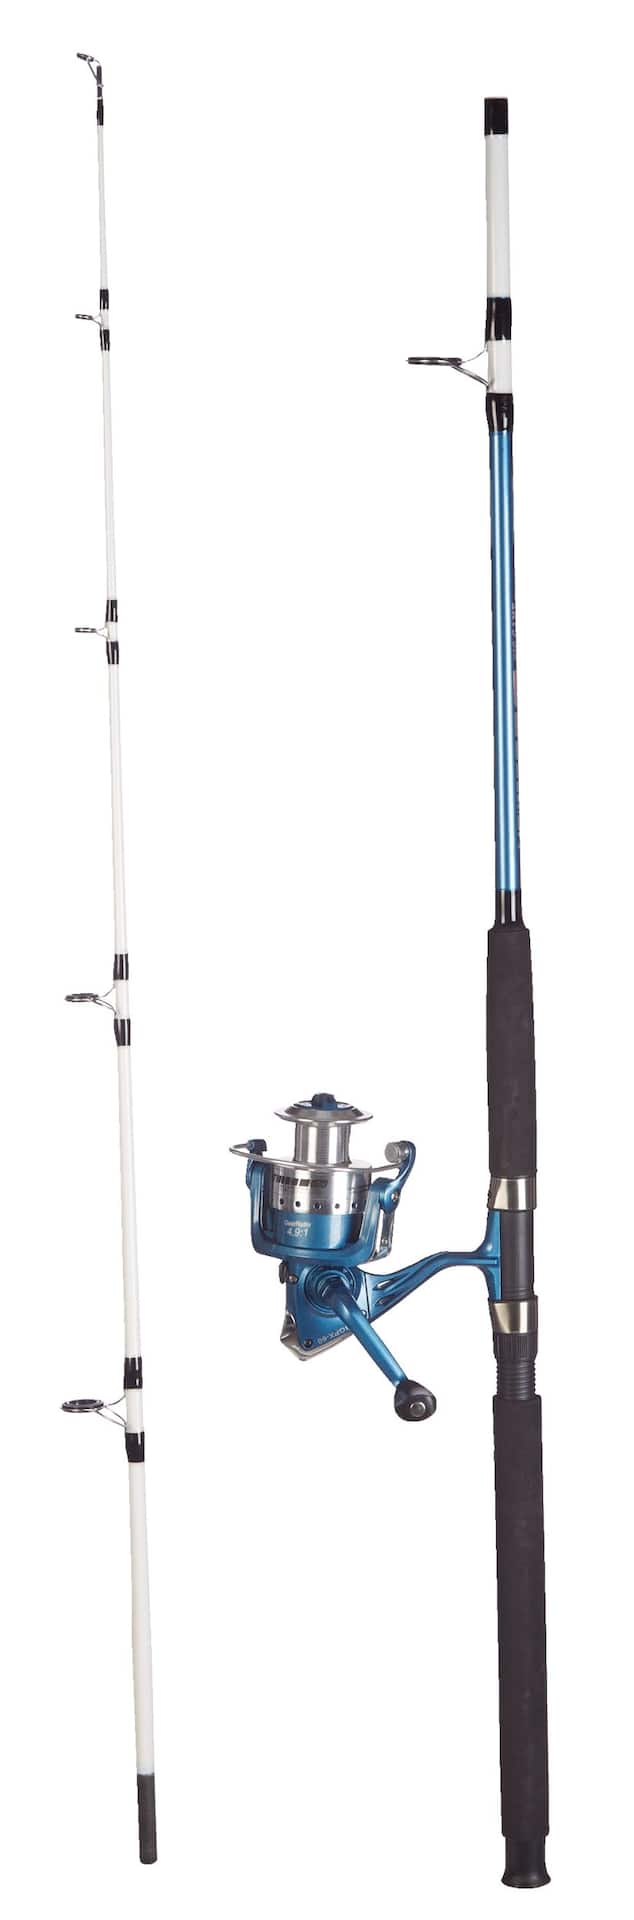 Lunkerhunt Sublime Spinning Fishing Rod and Reel Combo, Medium,  Anti-Reverse, 6.8-ft